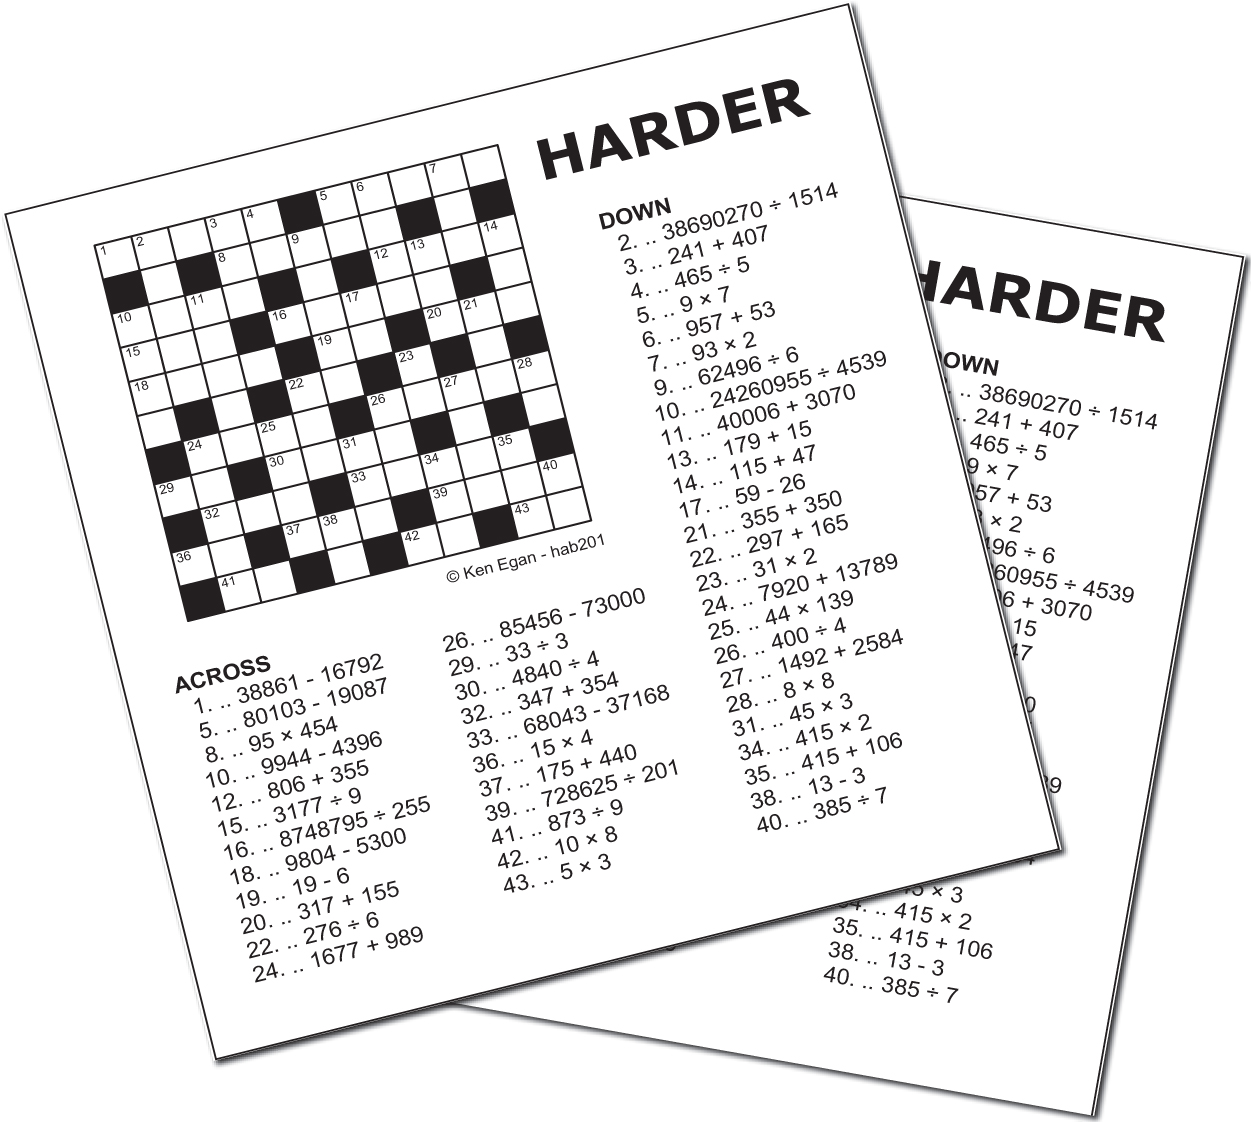 Thumbnail for 10 HARDER PUZZLE BOOKLET 03